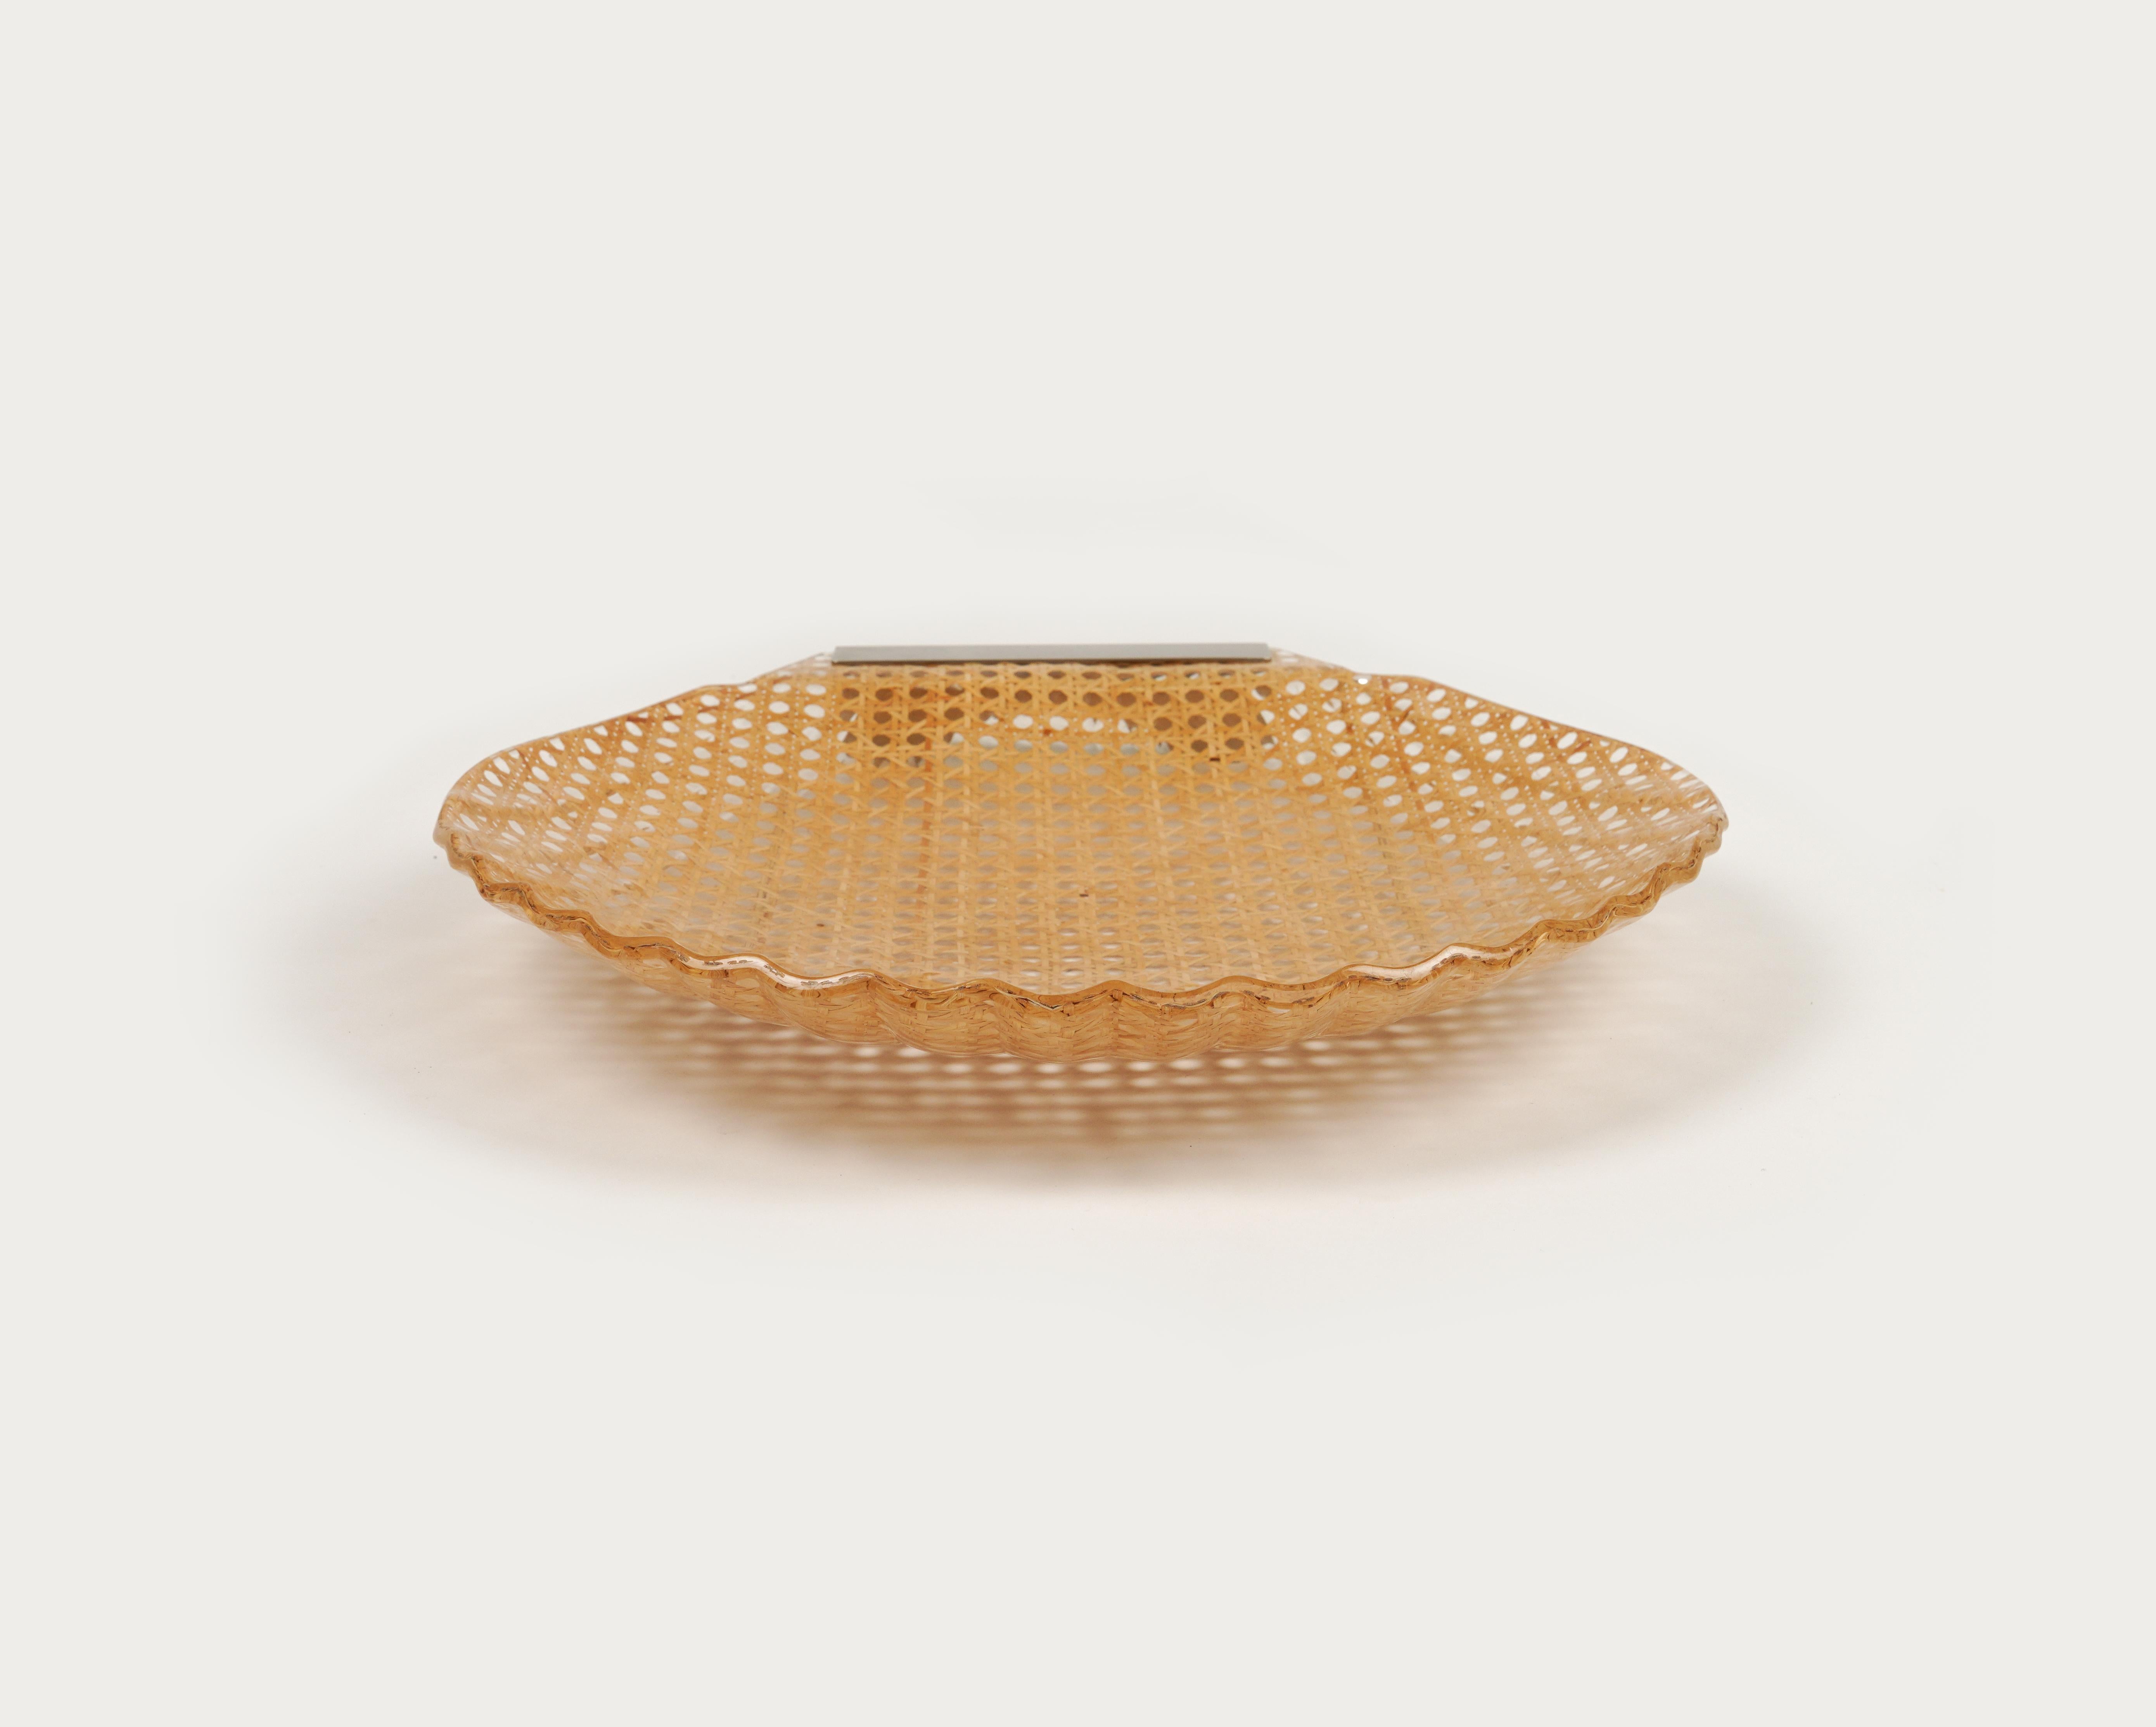 European Shell Serving Tray Lucite and Rattan Christian Dior Style, France, 1970s For Sale